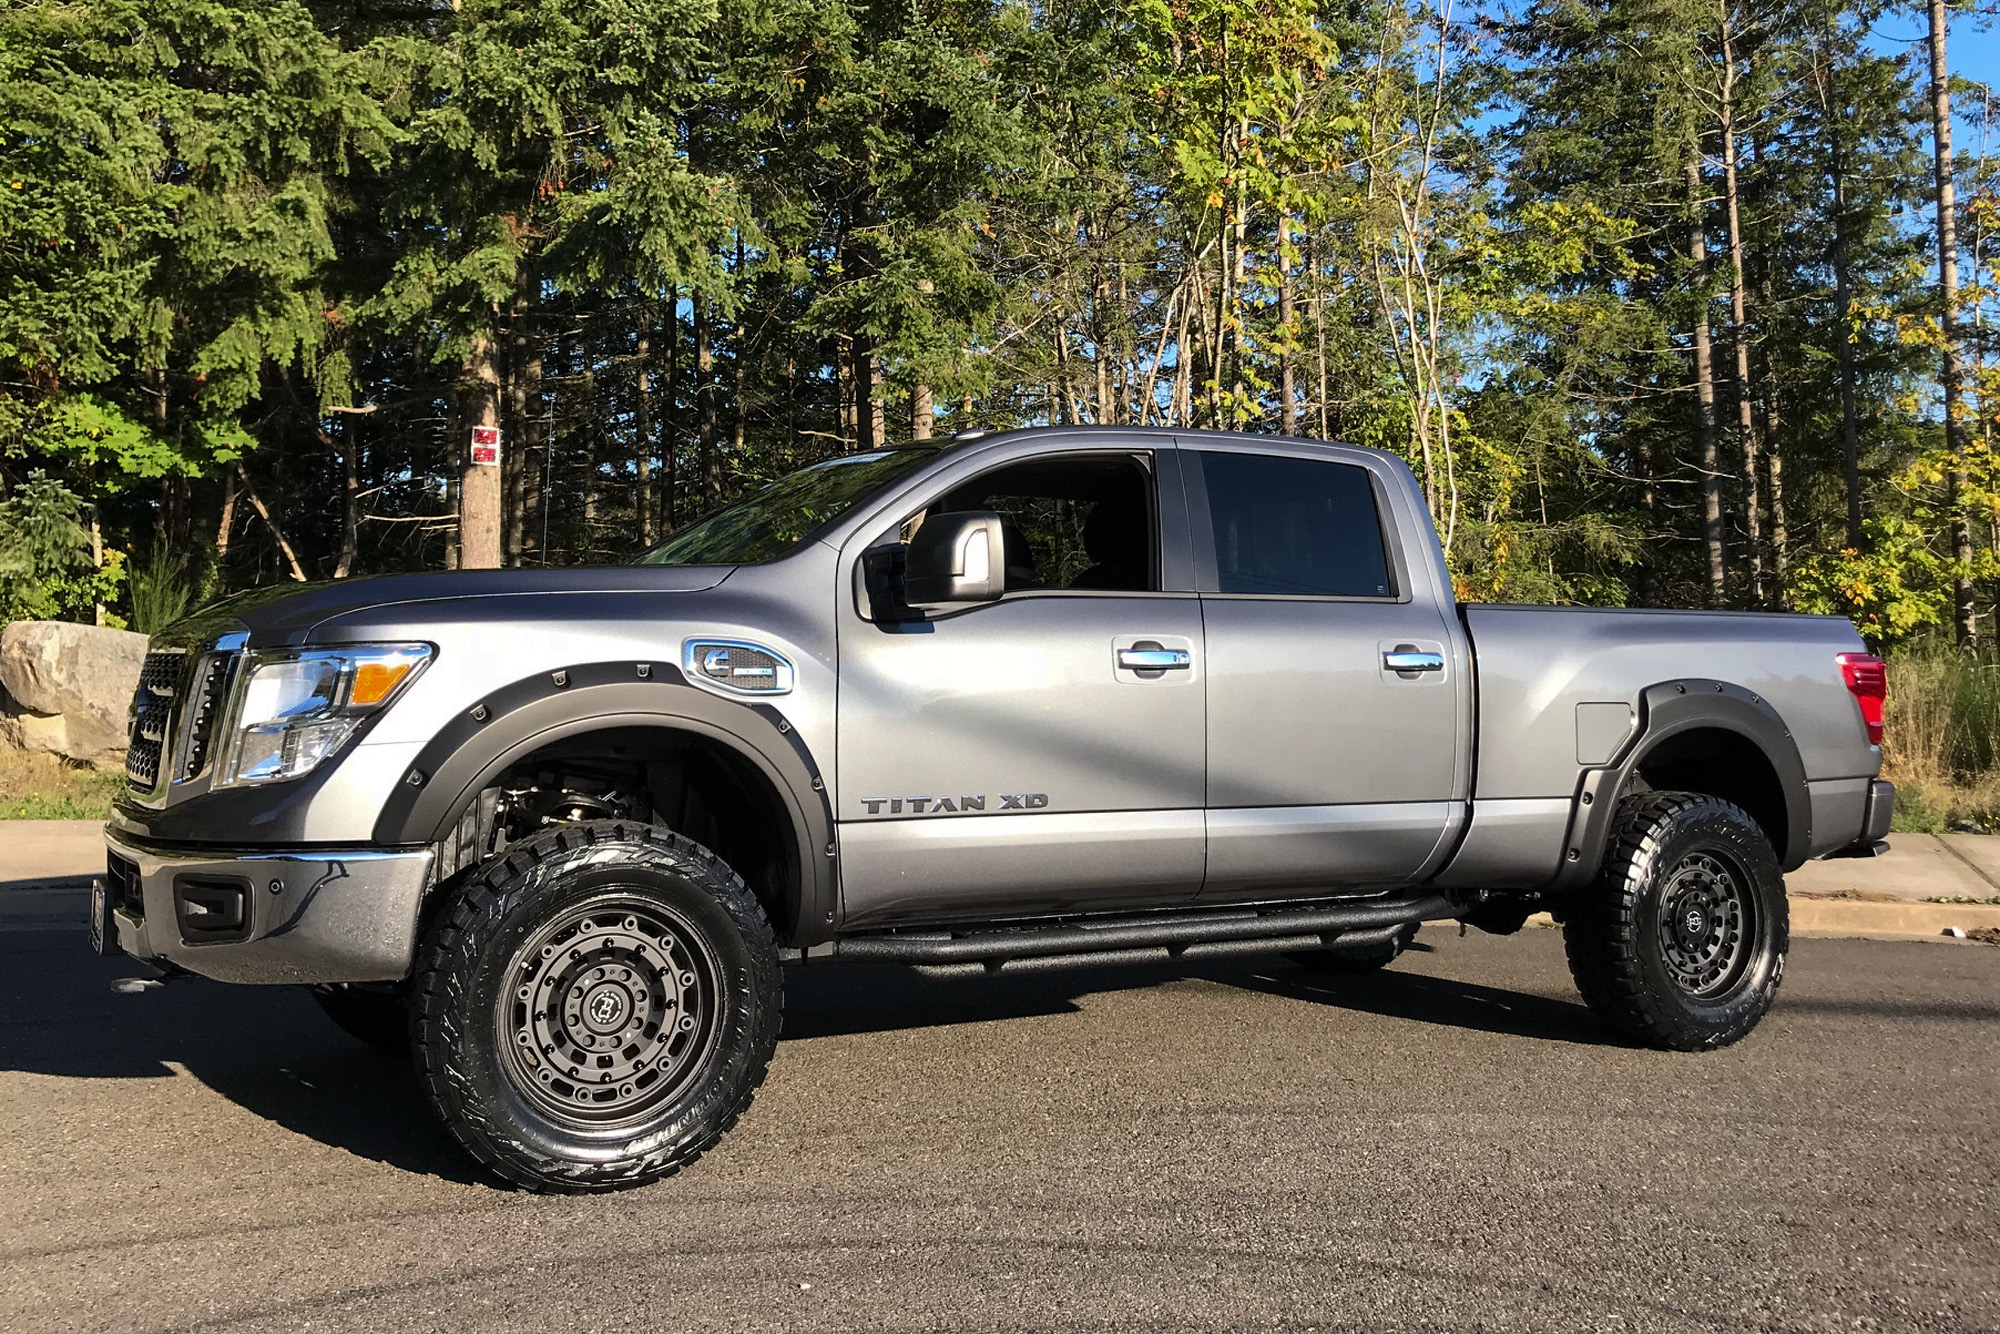 Learn about 161+ images nissan titan xd wheels - In.thptnganamst.edu.vn